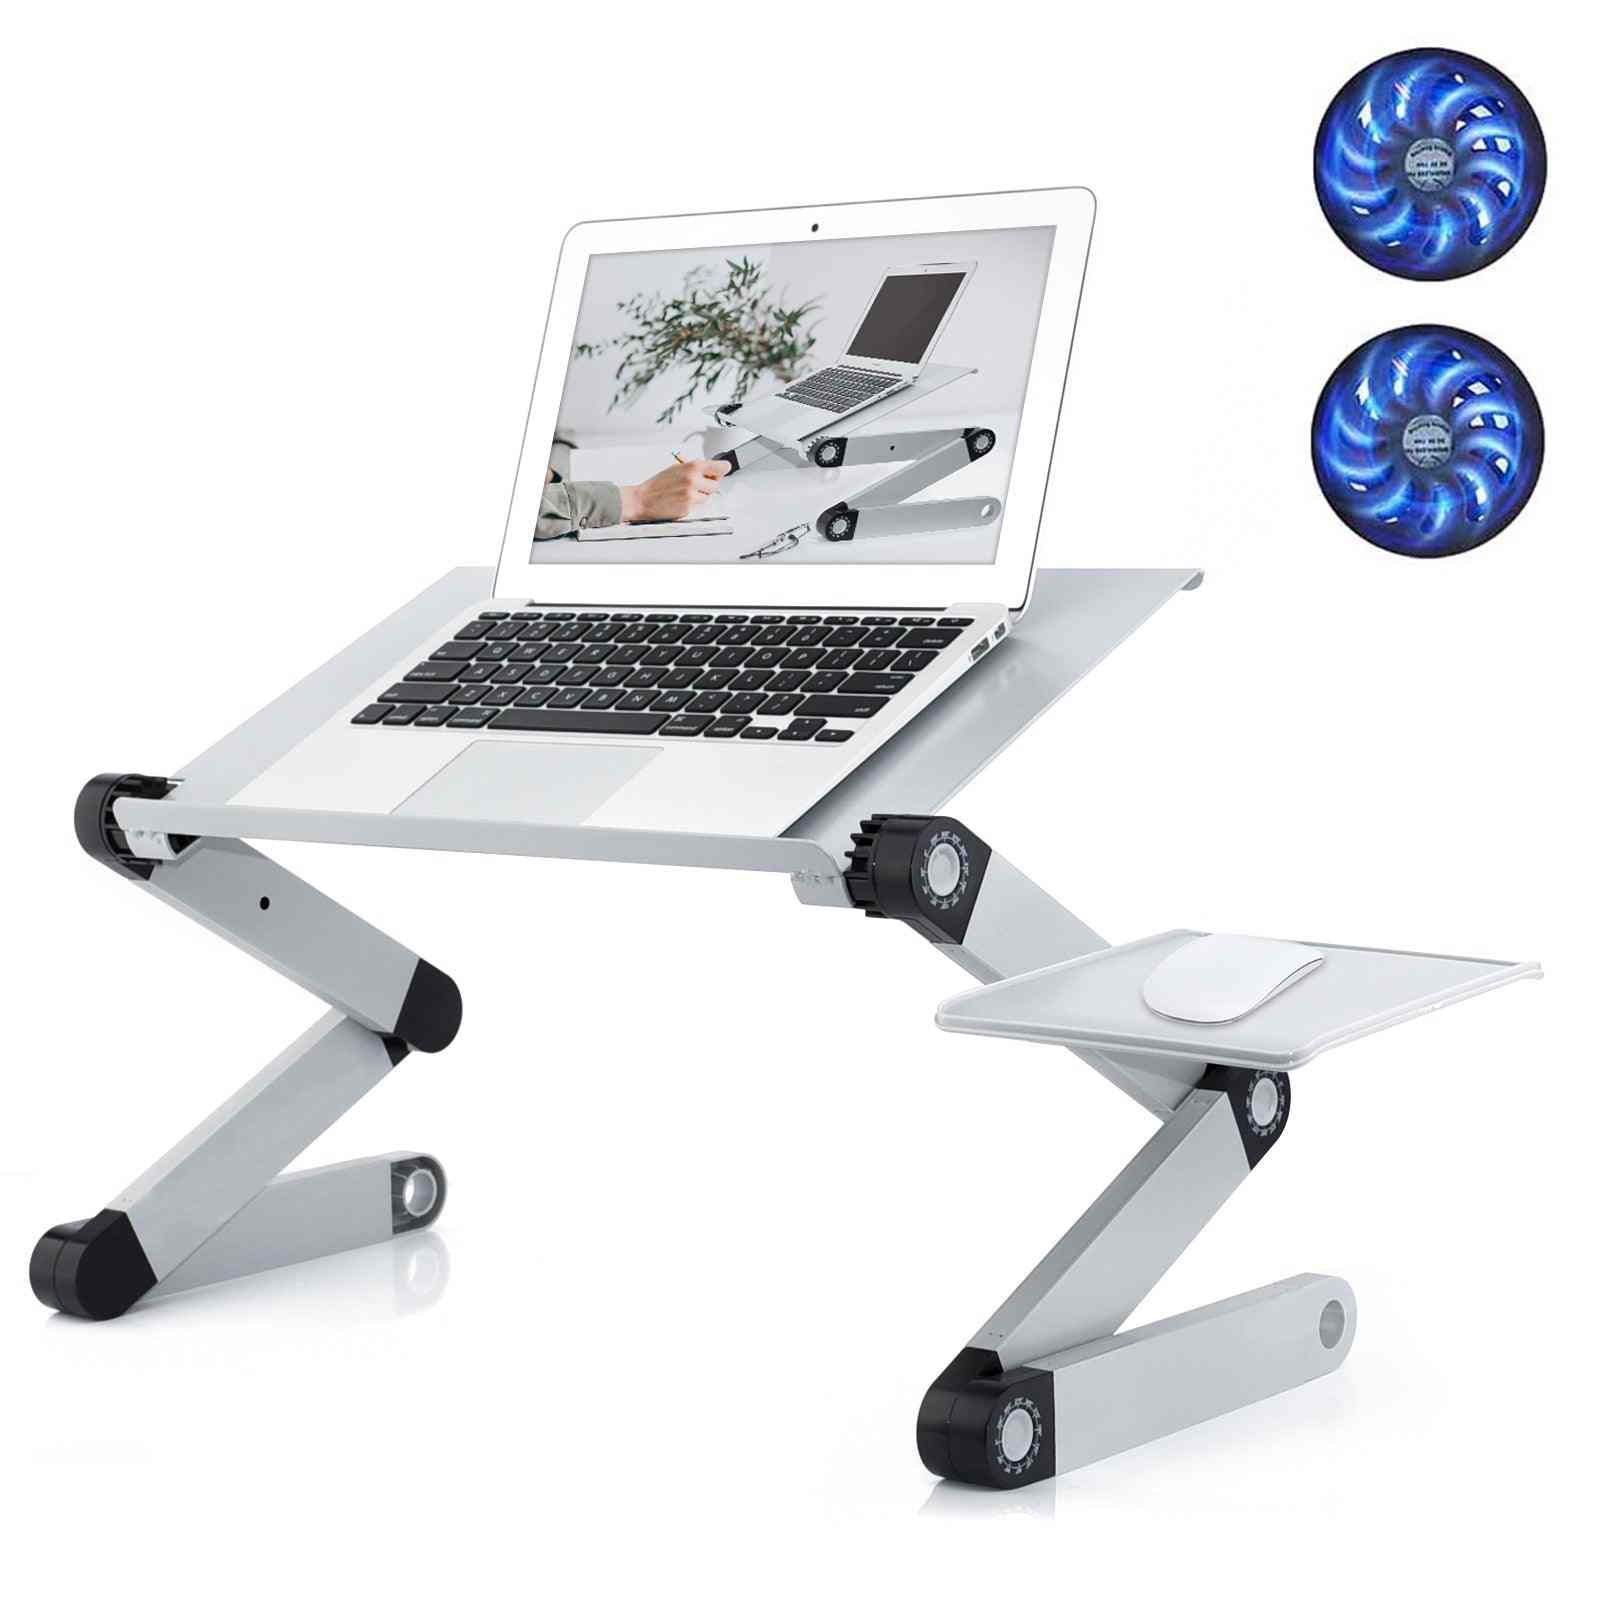 Adjustable Laptop Stand, RAINBEAN Laptop Desk with 2 CPU Cooling USB Fans for Bed Aluminum Lap Workstation Desk with Mouse Pad, Foldable Cook Book Stand Notebook Holder Sofa,Amazon Banned - Artiloom Computer & Office 59.50 Adjustable Laptop Stand, RAINBEAN Laptop Desk with 2 CPU Cooling USB Fans for Bed Aluminum Lap Workstation Desk with Mouse Pad, Foldable Cook Book Stand Notebook Holder Sofa,Amazon Banned - undefined